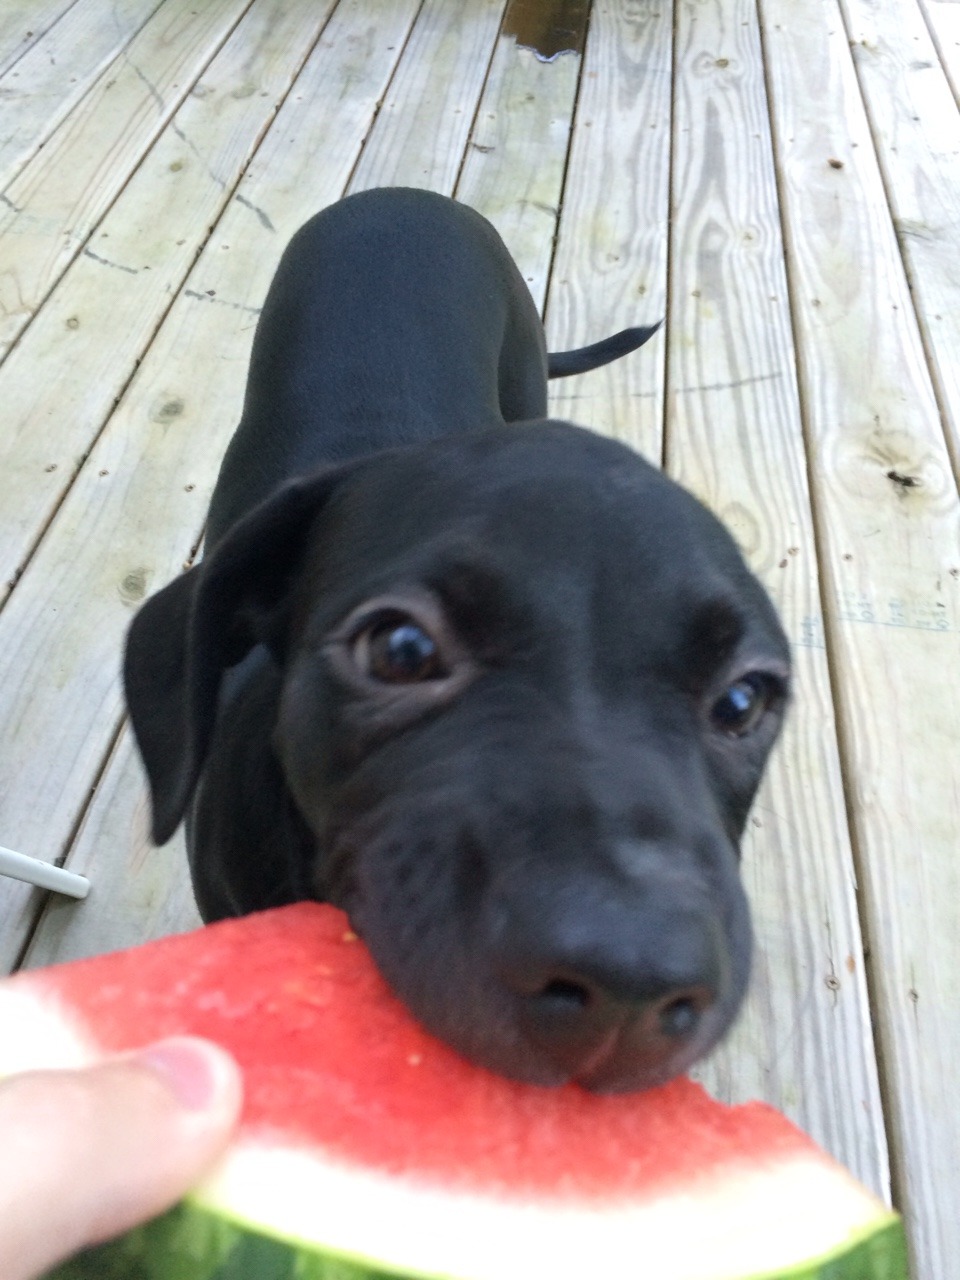 babybluesuv:  royonfire:  I present to you a puppy eating watermelon.  I can’t